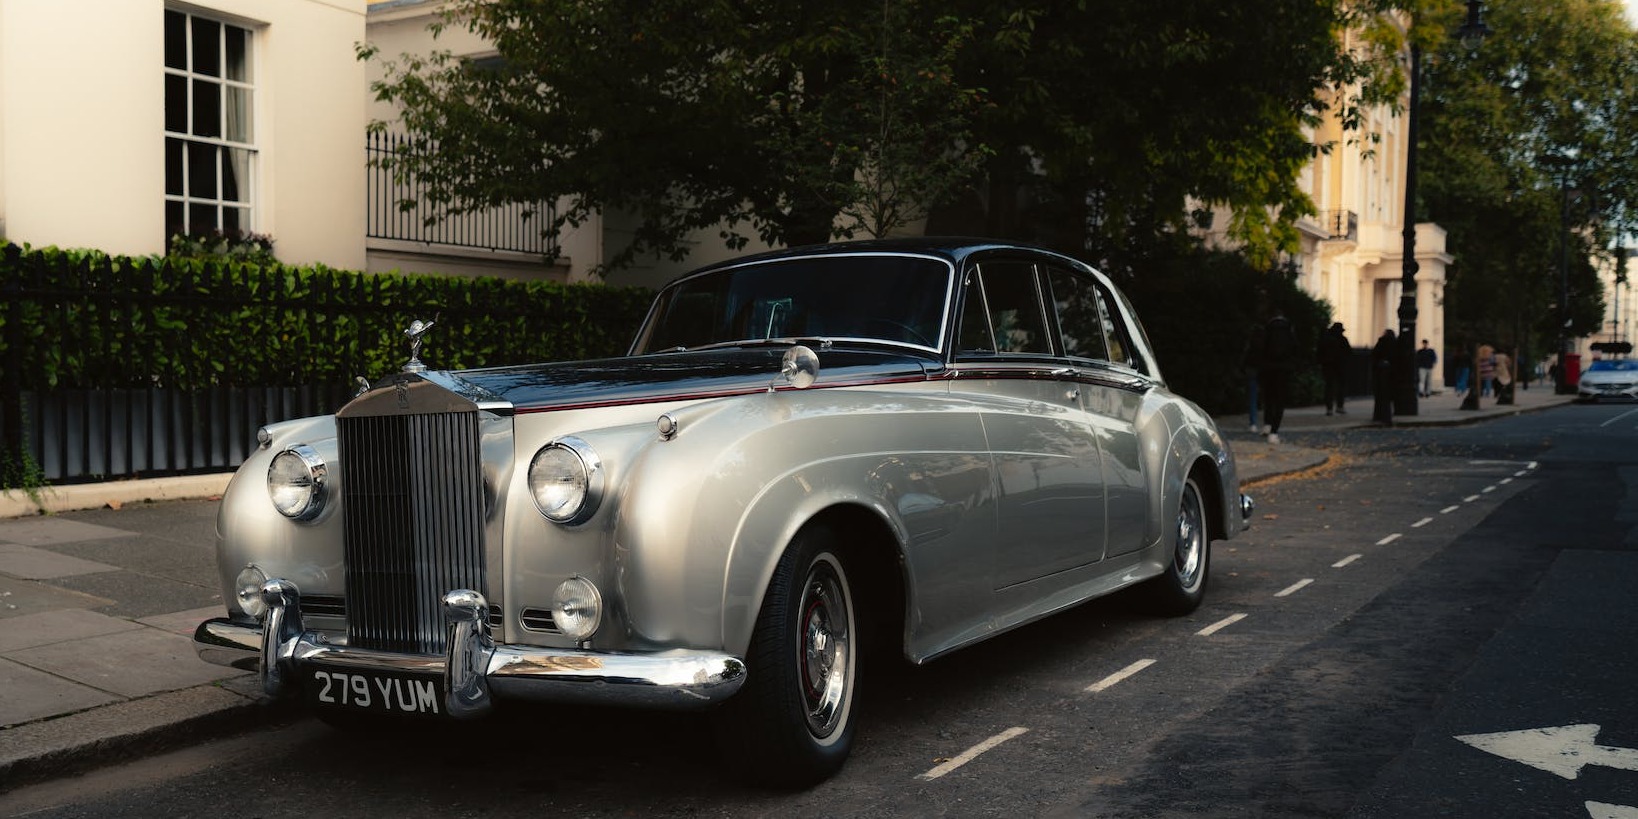 Comparing Costs for Luxury Vs. Classic Prom Cars in the UK: What's the Best Value?